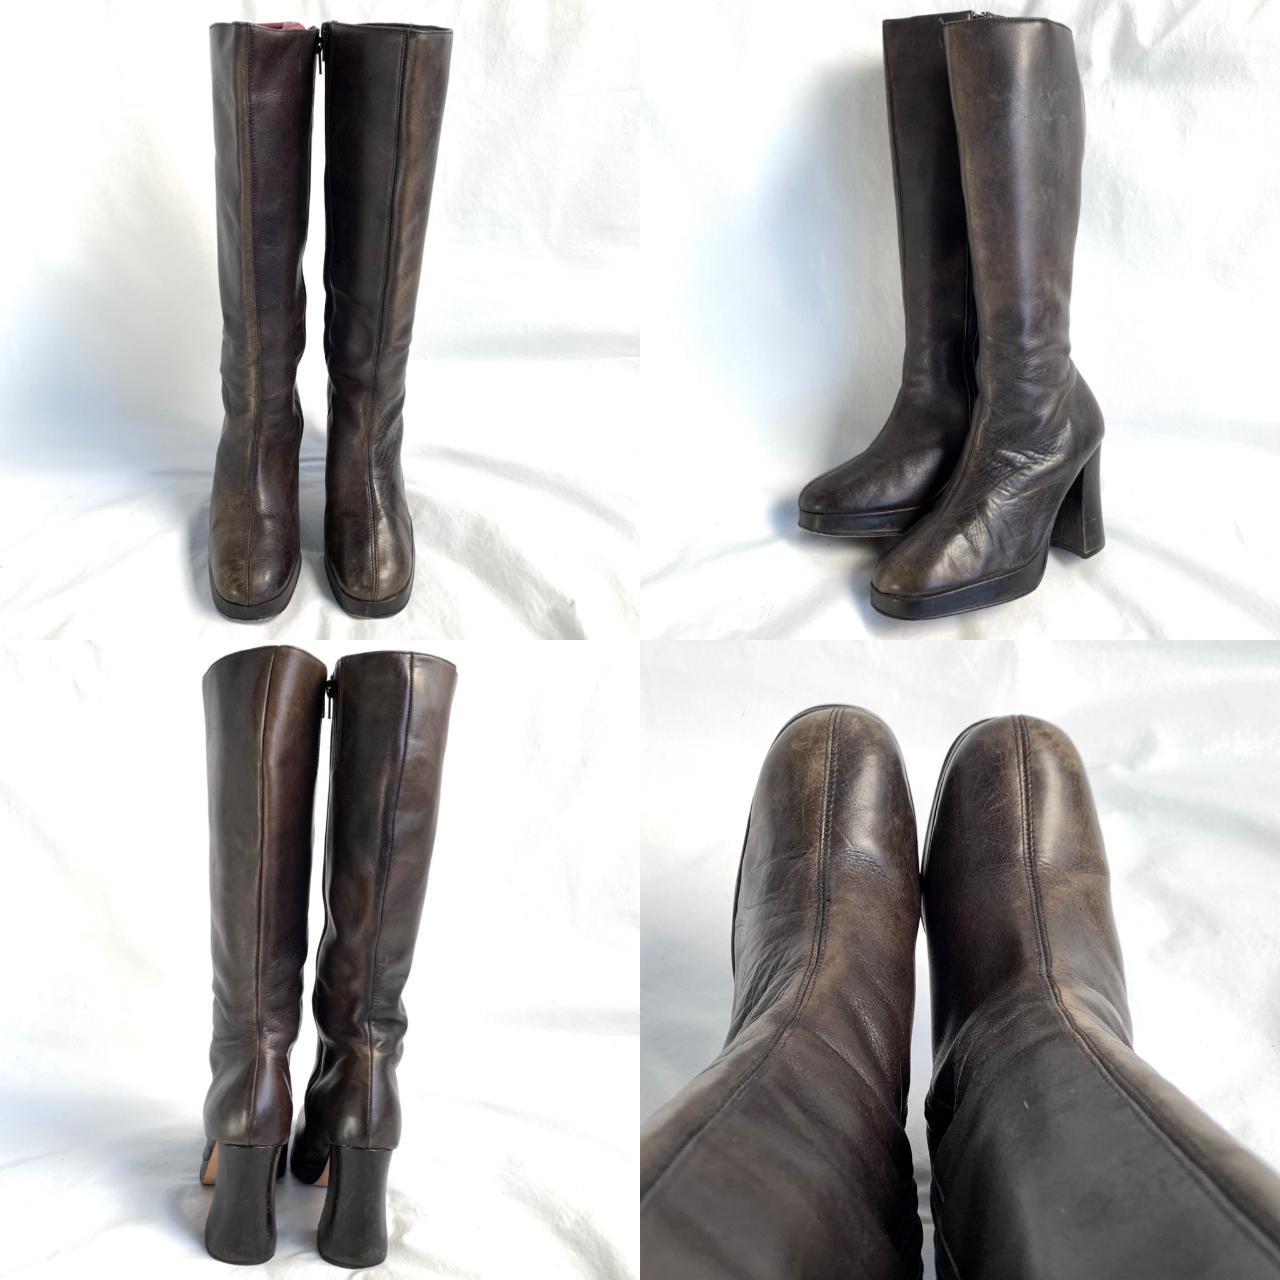 Product Image 2 - Vintage platform boots, brown and